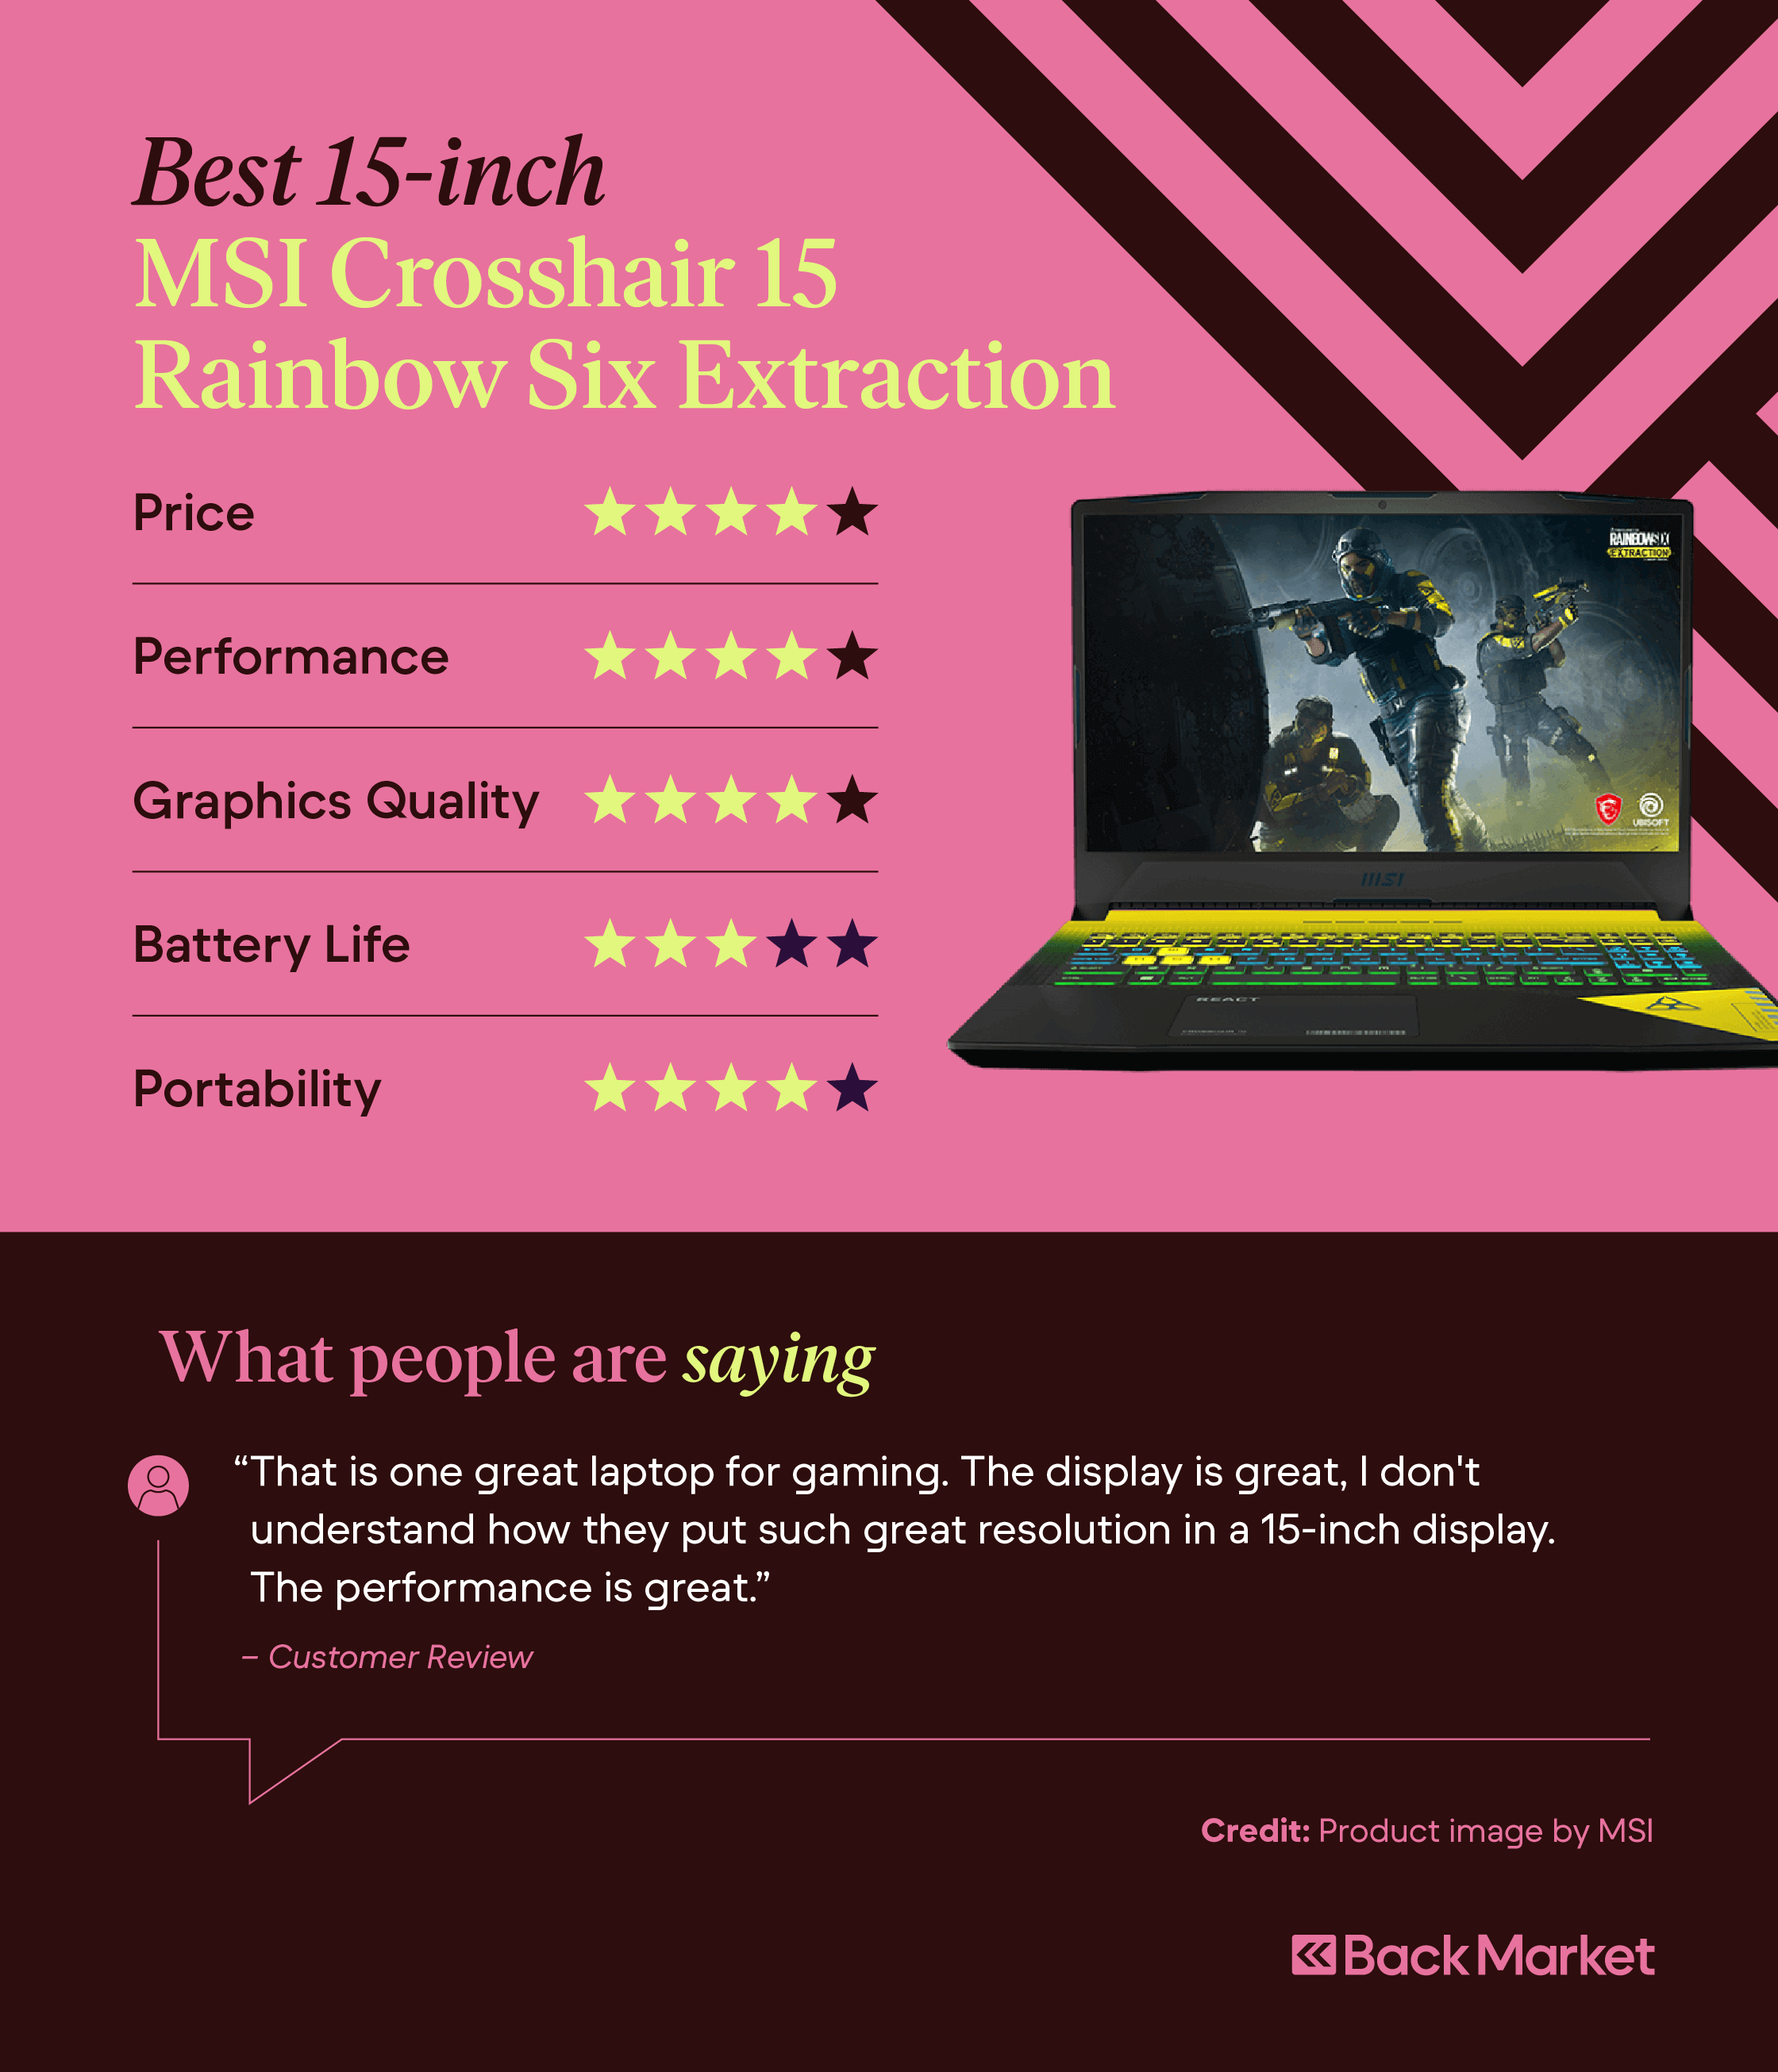 Best 15-inch gaming laptop